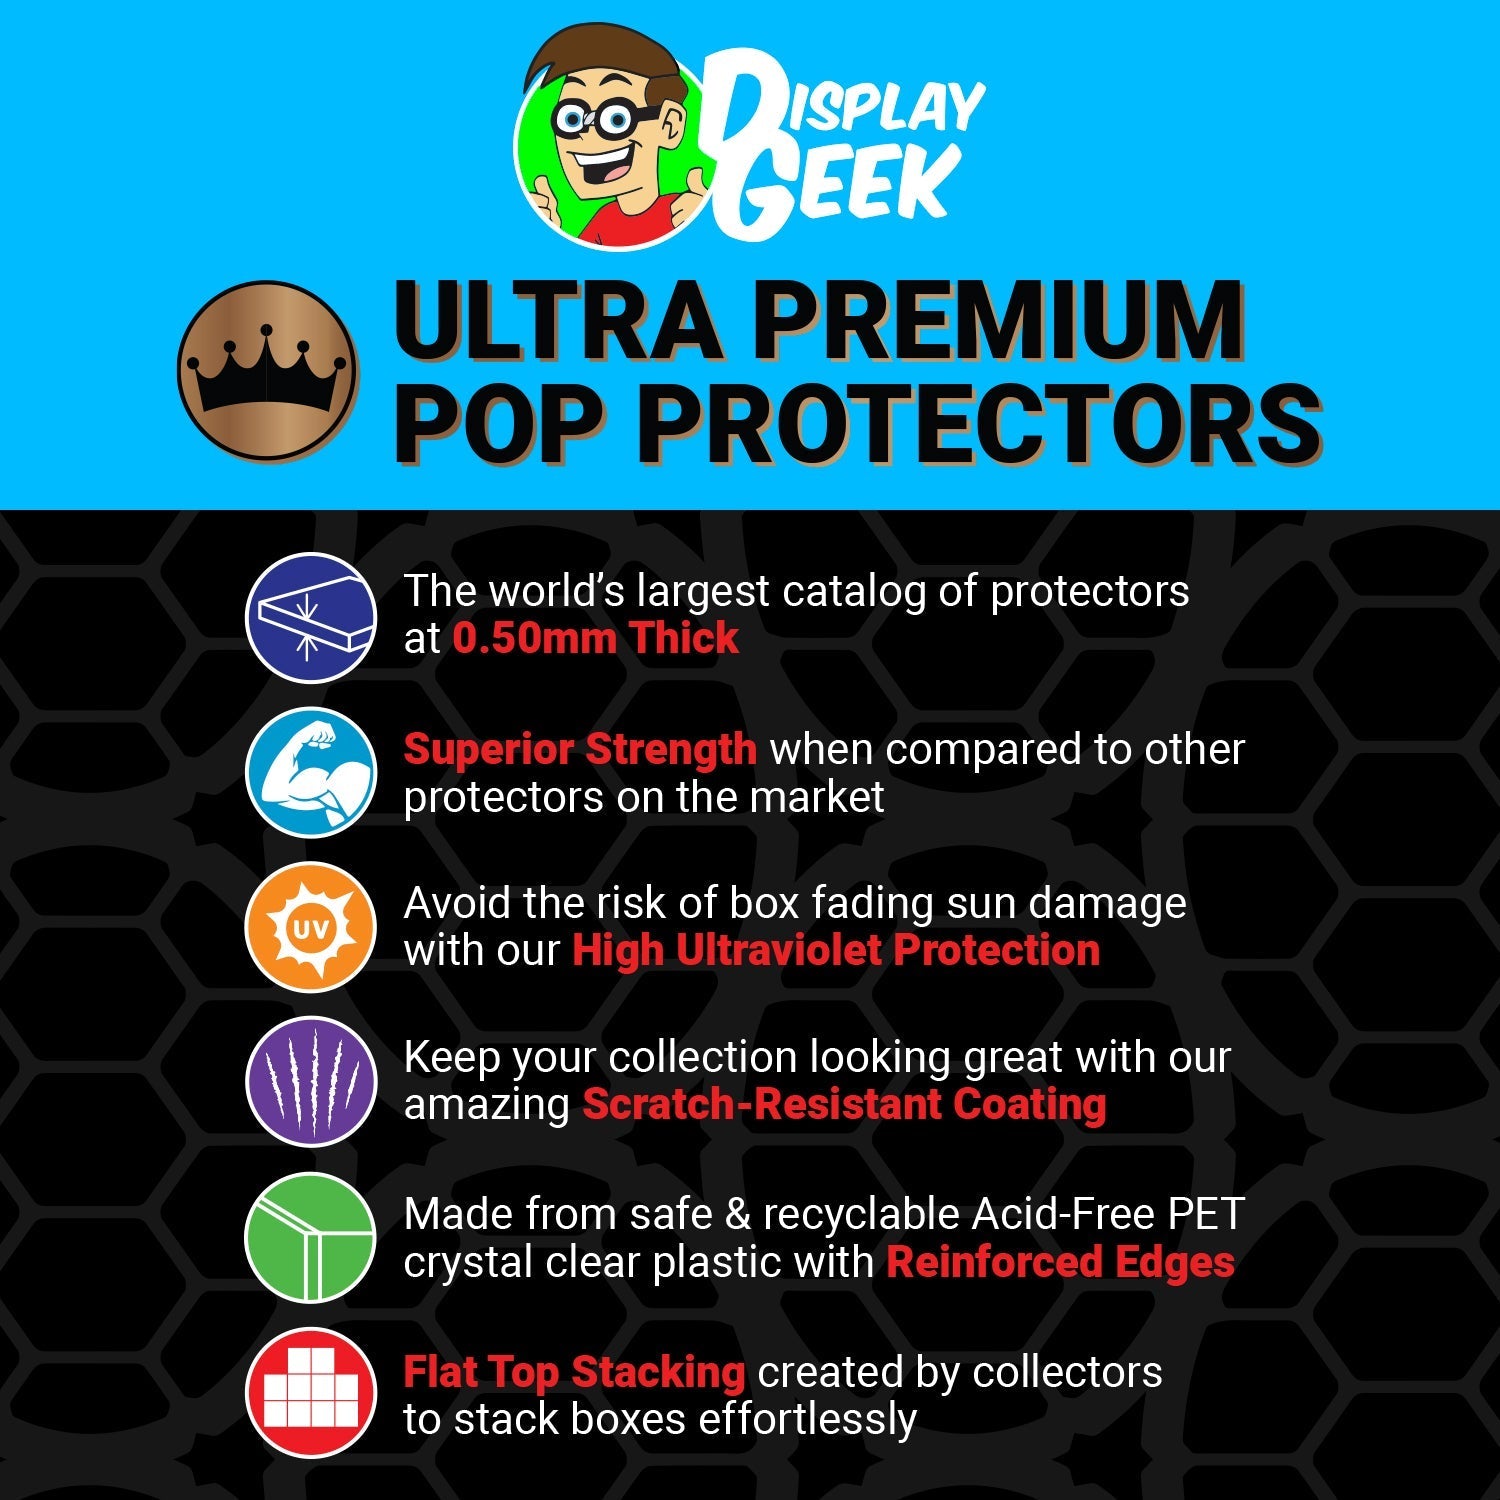 Pop Protector for Aquaman #13 Funko Pop Comic Covers - PPG Pop Protector Guide Search Created by Display Geek